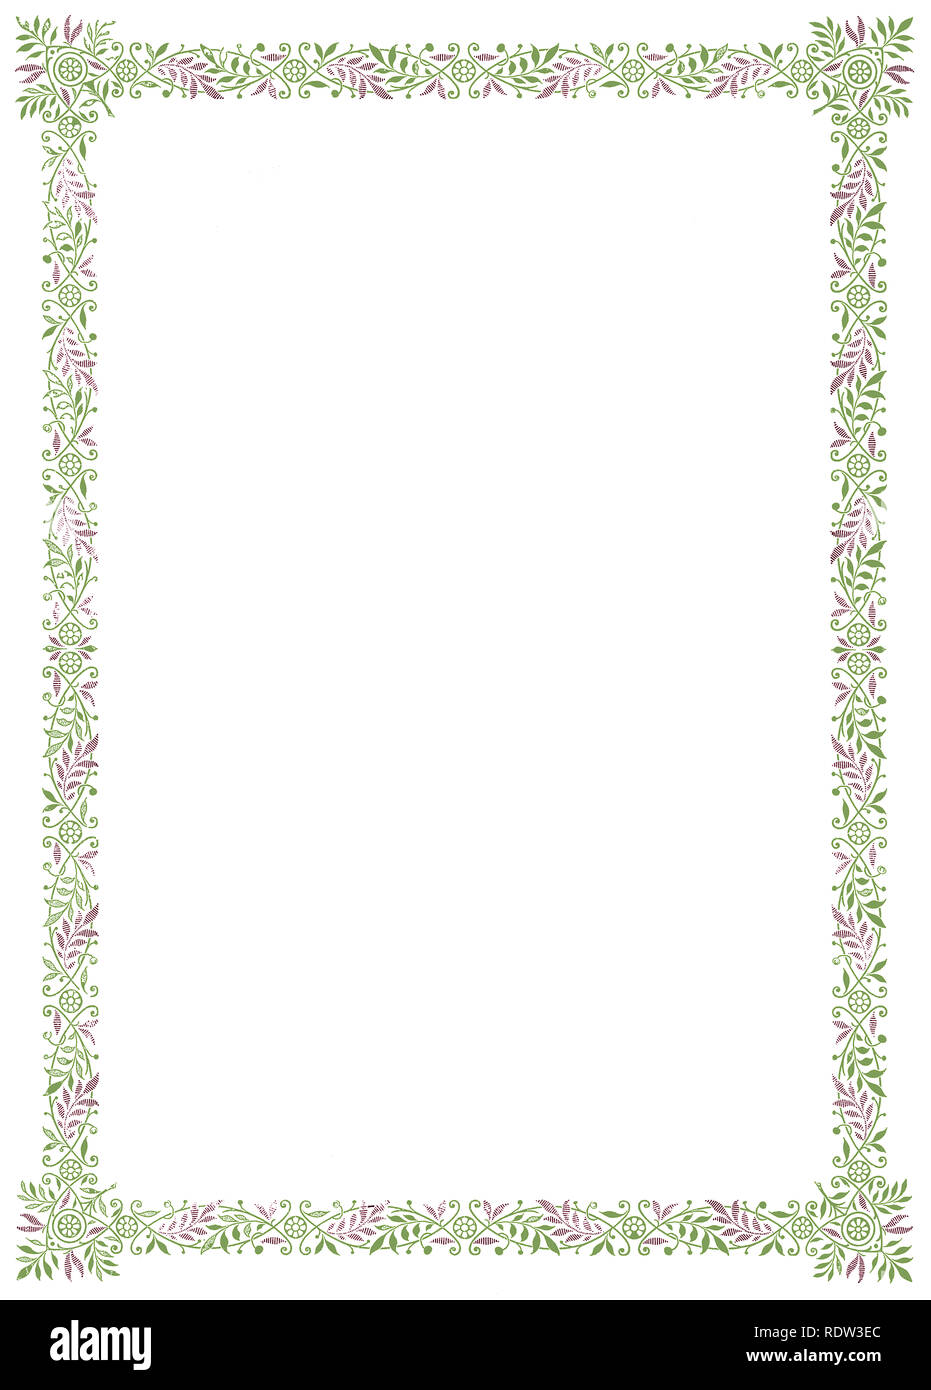 Vintage Edwardian floral full-page border, in green with purple or red highlights Stock Photo